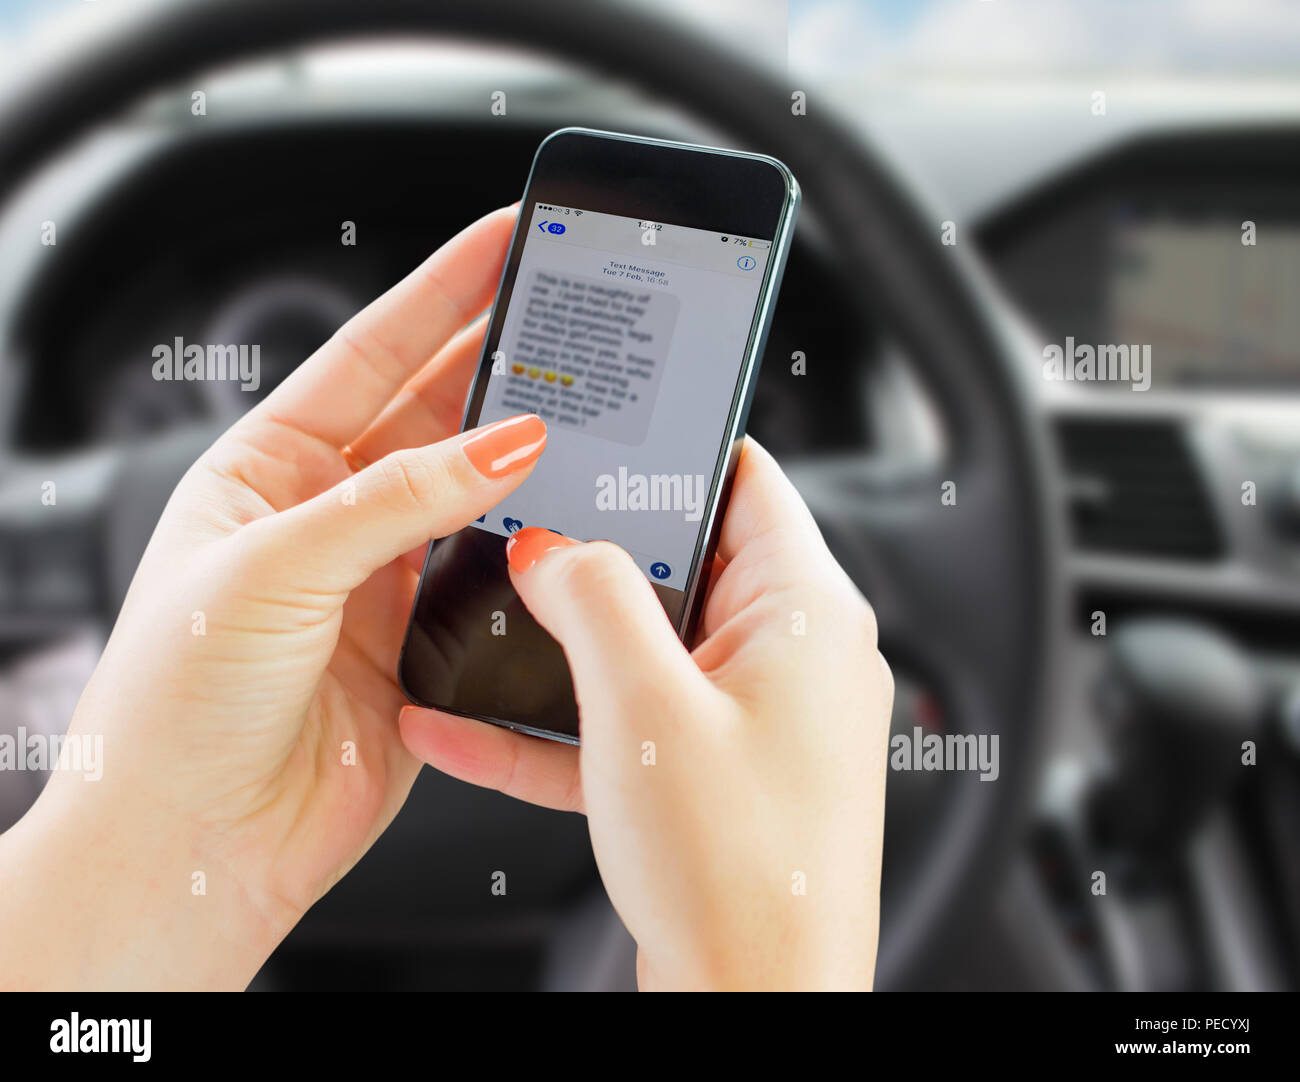 woman texting on cellphone while driving a car. dangerous situation. Distracted driver from cellphone. Stock Photo